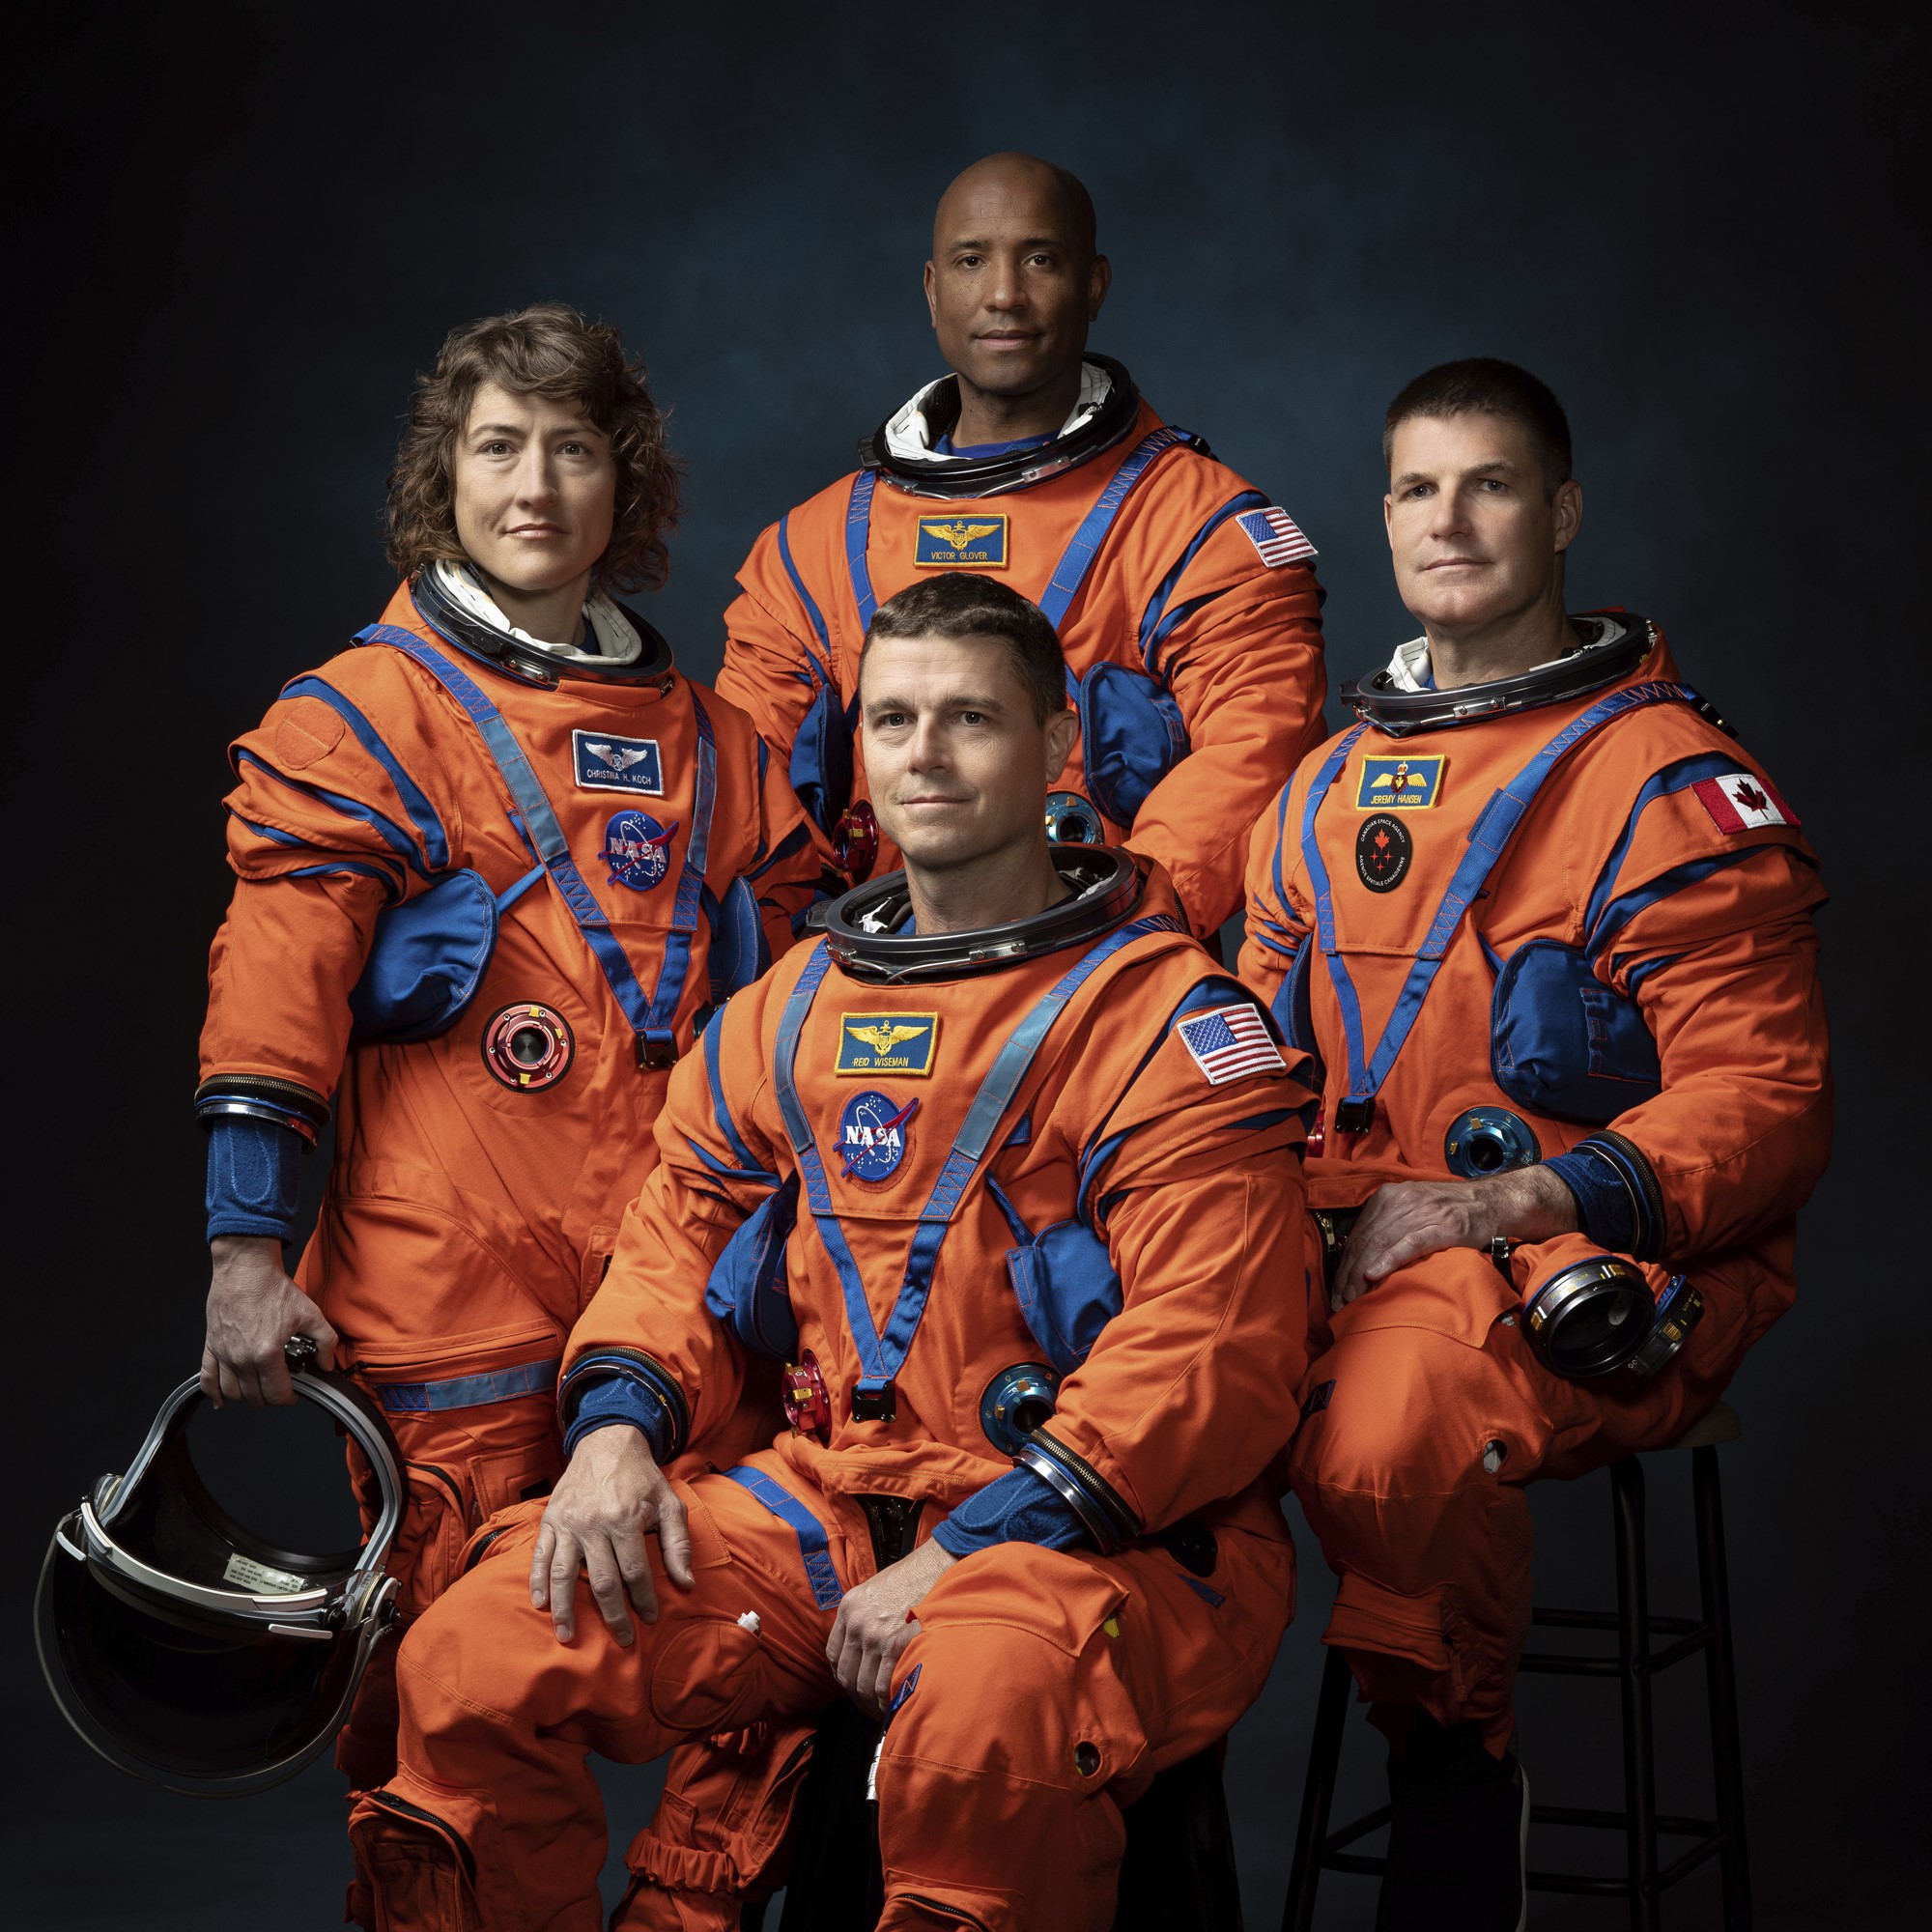 A photo of four astronauts, three standing and one sitting, all in their NASA spacesuits and smiling. One holds a helmet.